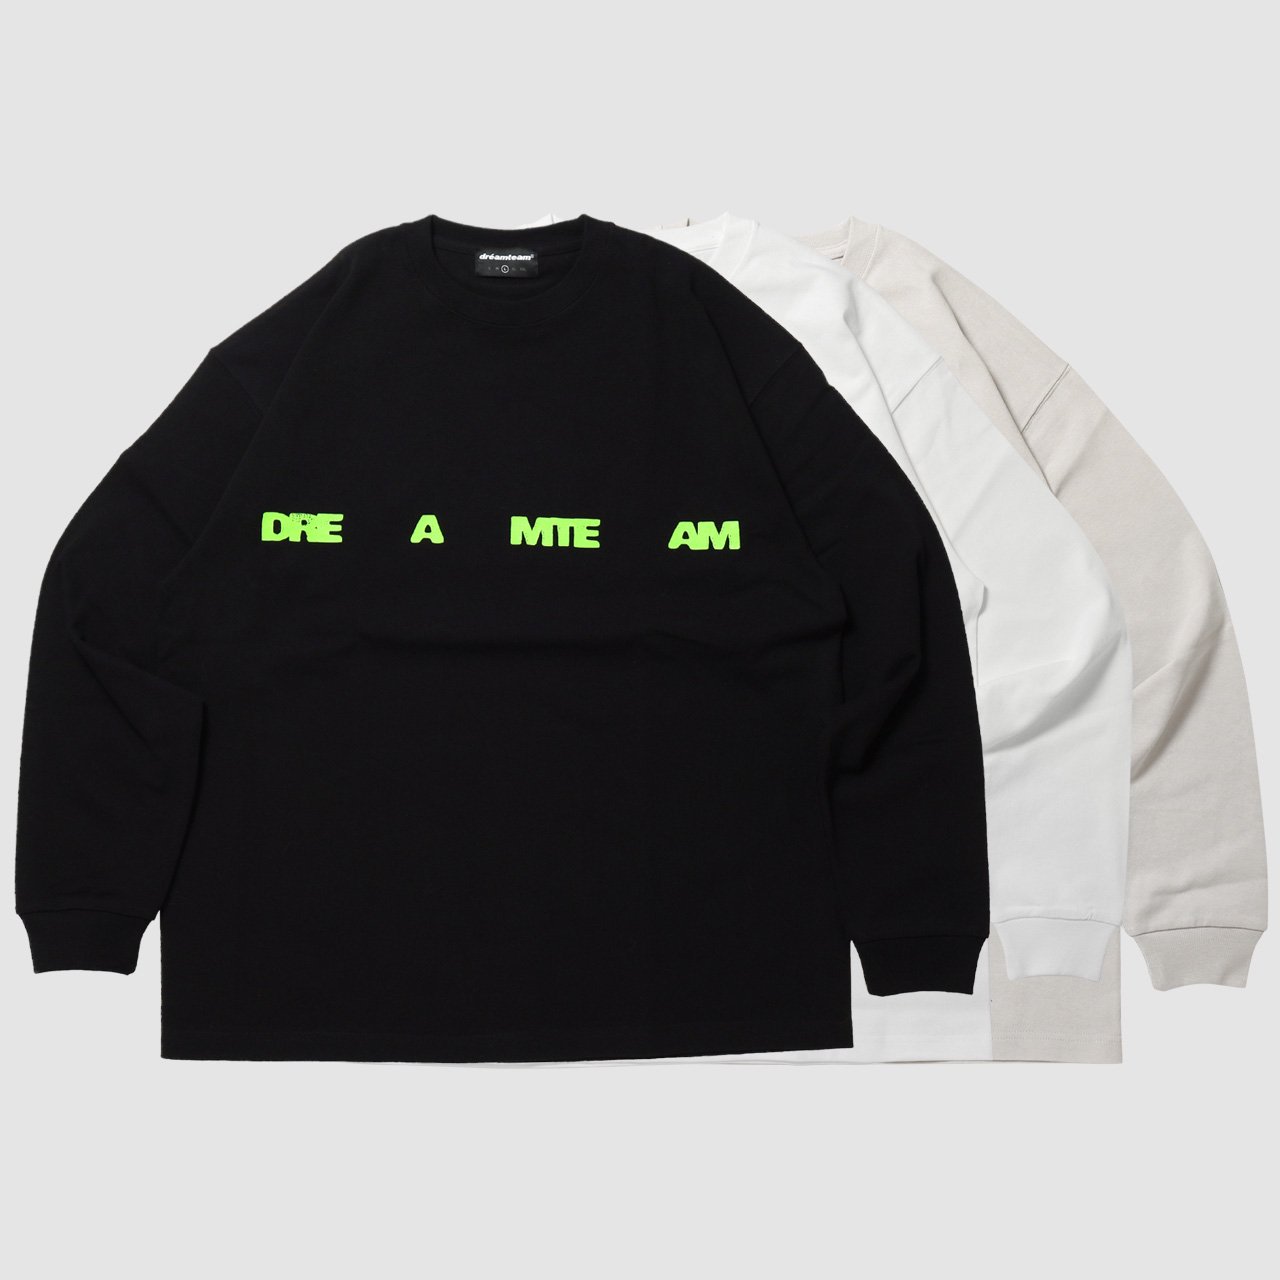 <img class='new_mark_img1' src='https://img.shop-pro.jp/img/new/icons21.gif' style='border:none;display:inline;margin:0px;padding:0px;width:auto;' />Dre a mte am Big Silhouette Long Sleeve T-Shirts